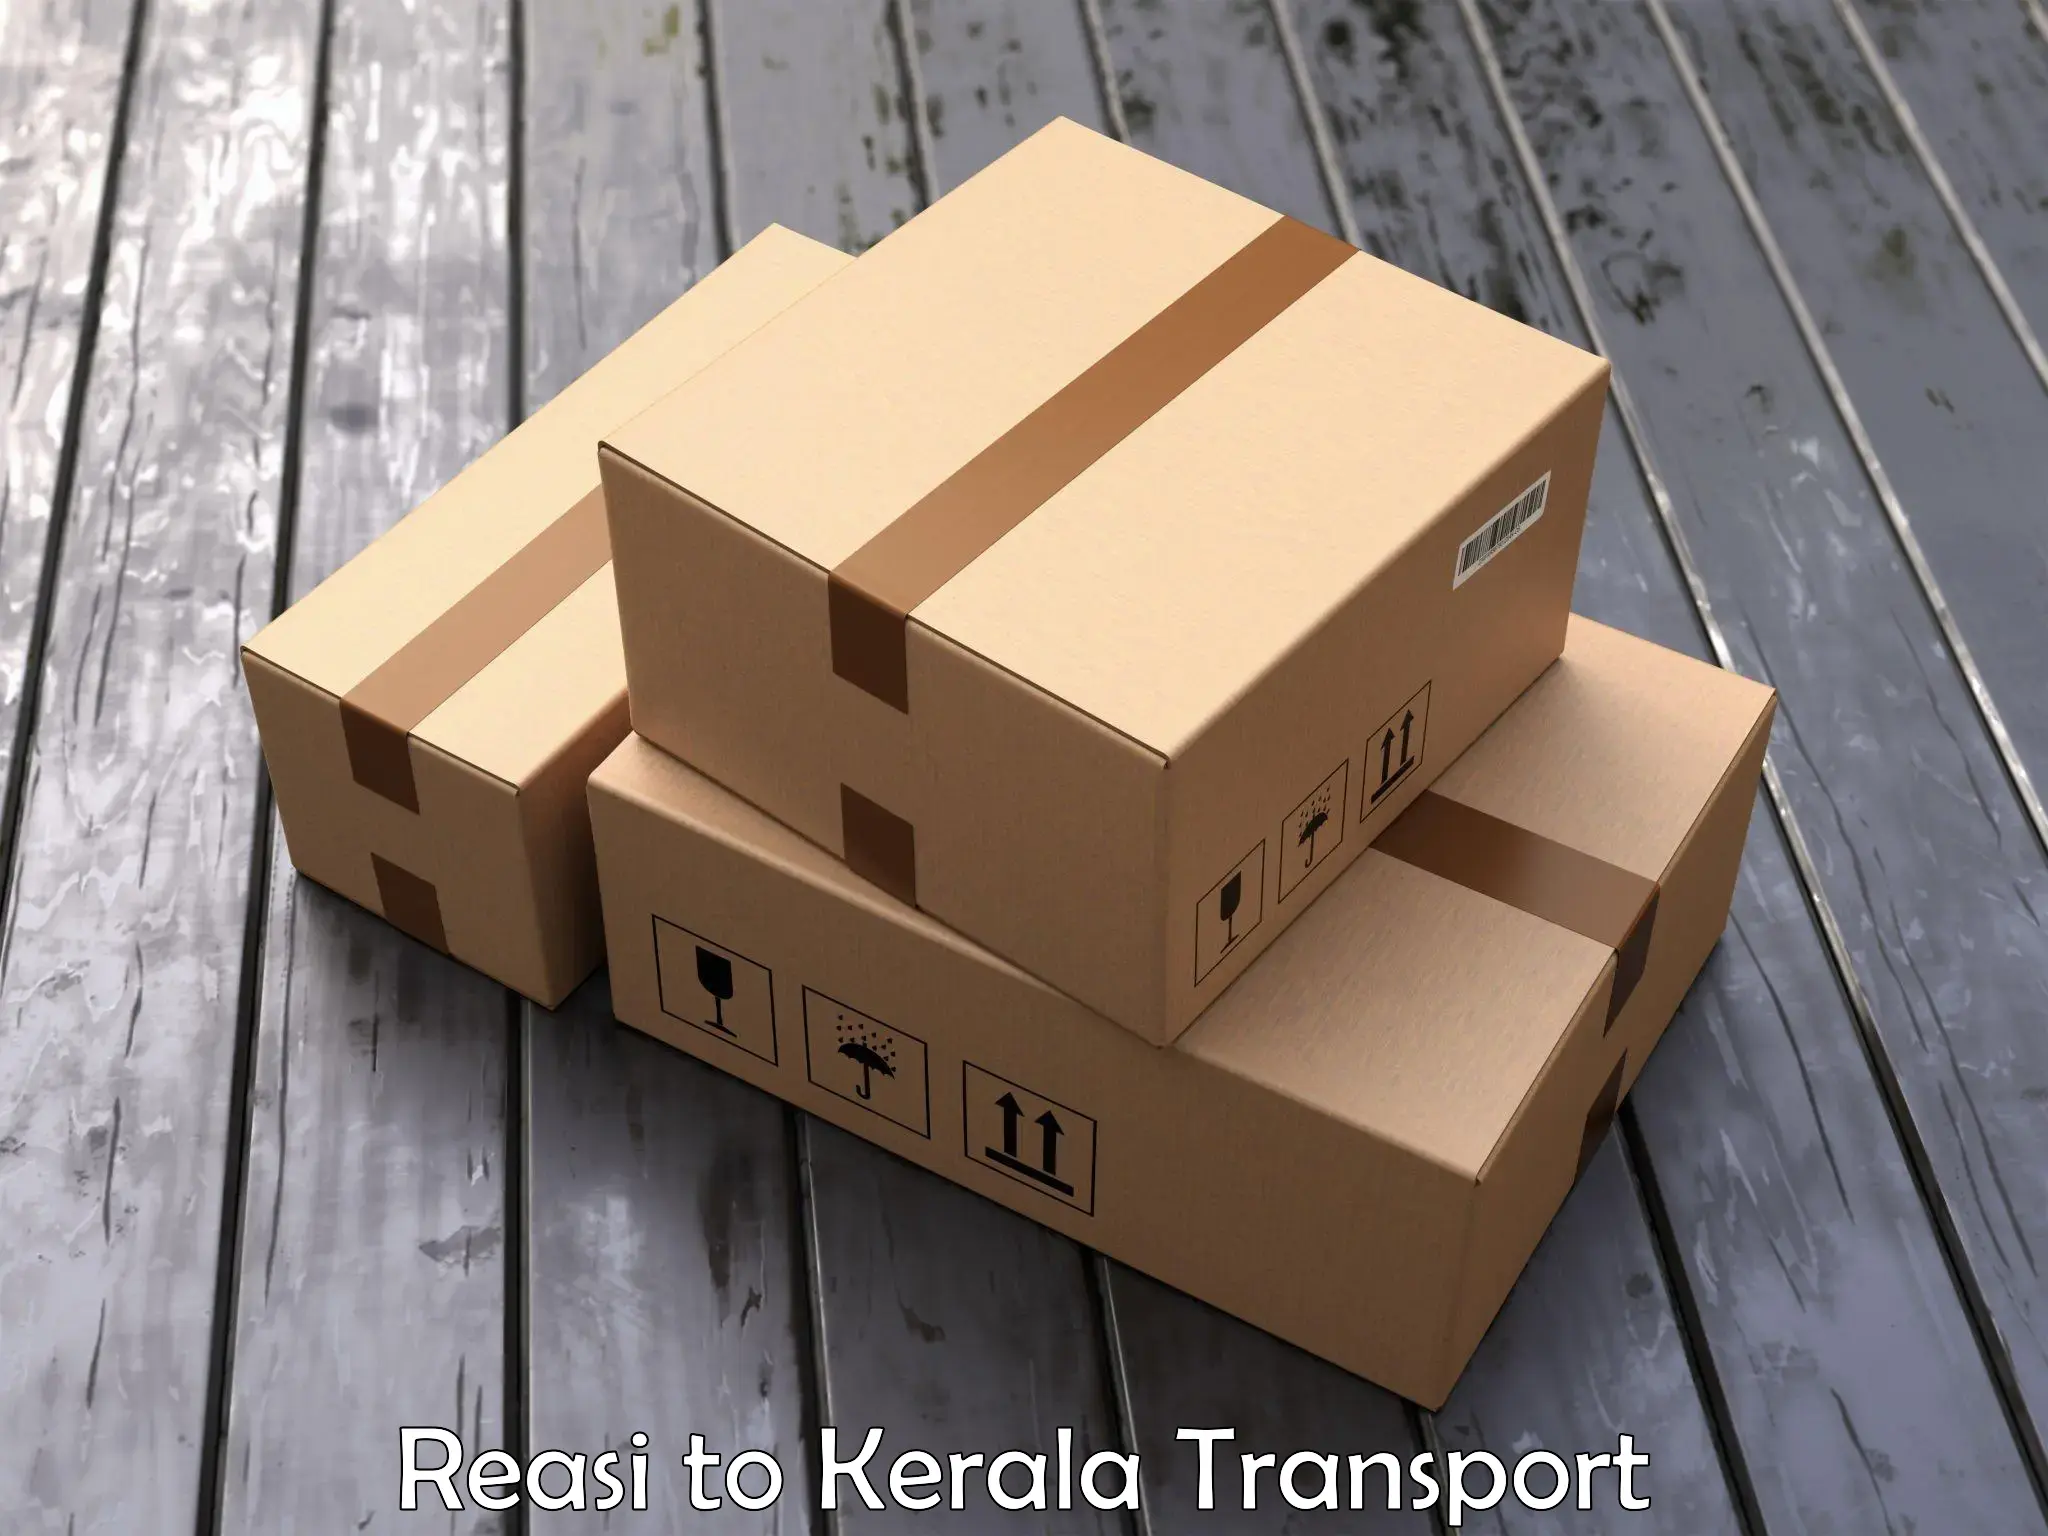 Goods delivery service Reasi to Kerala